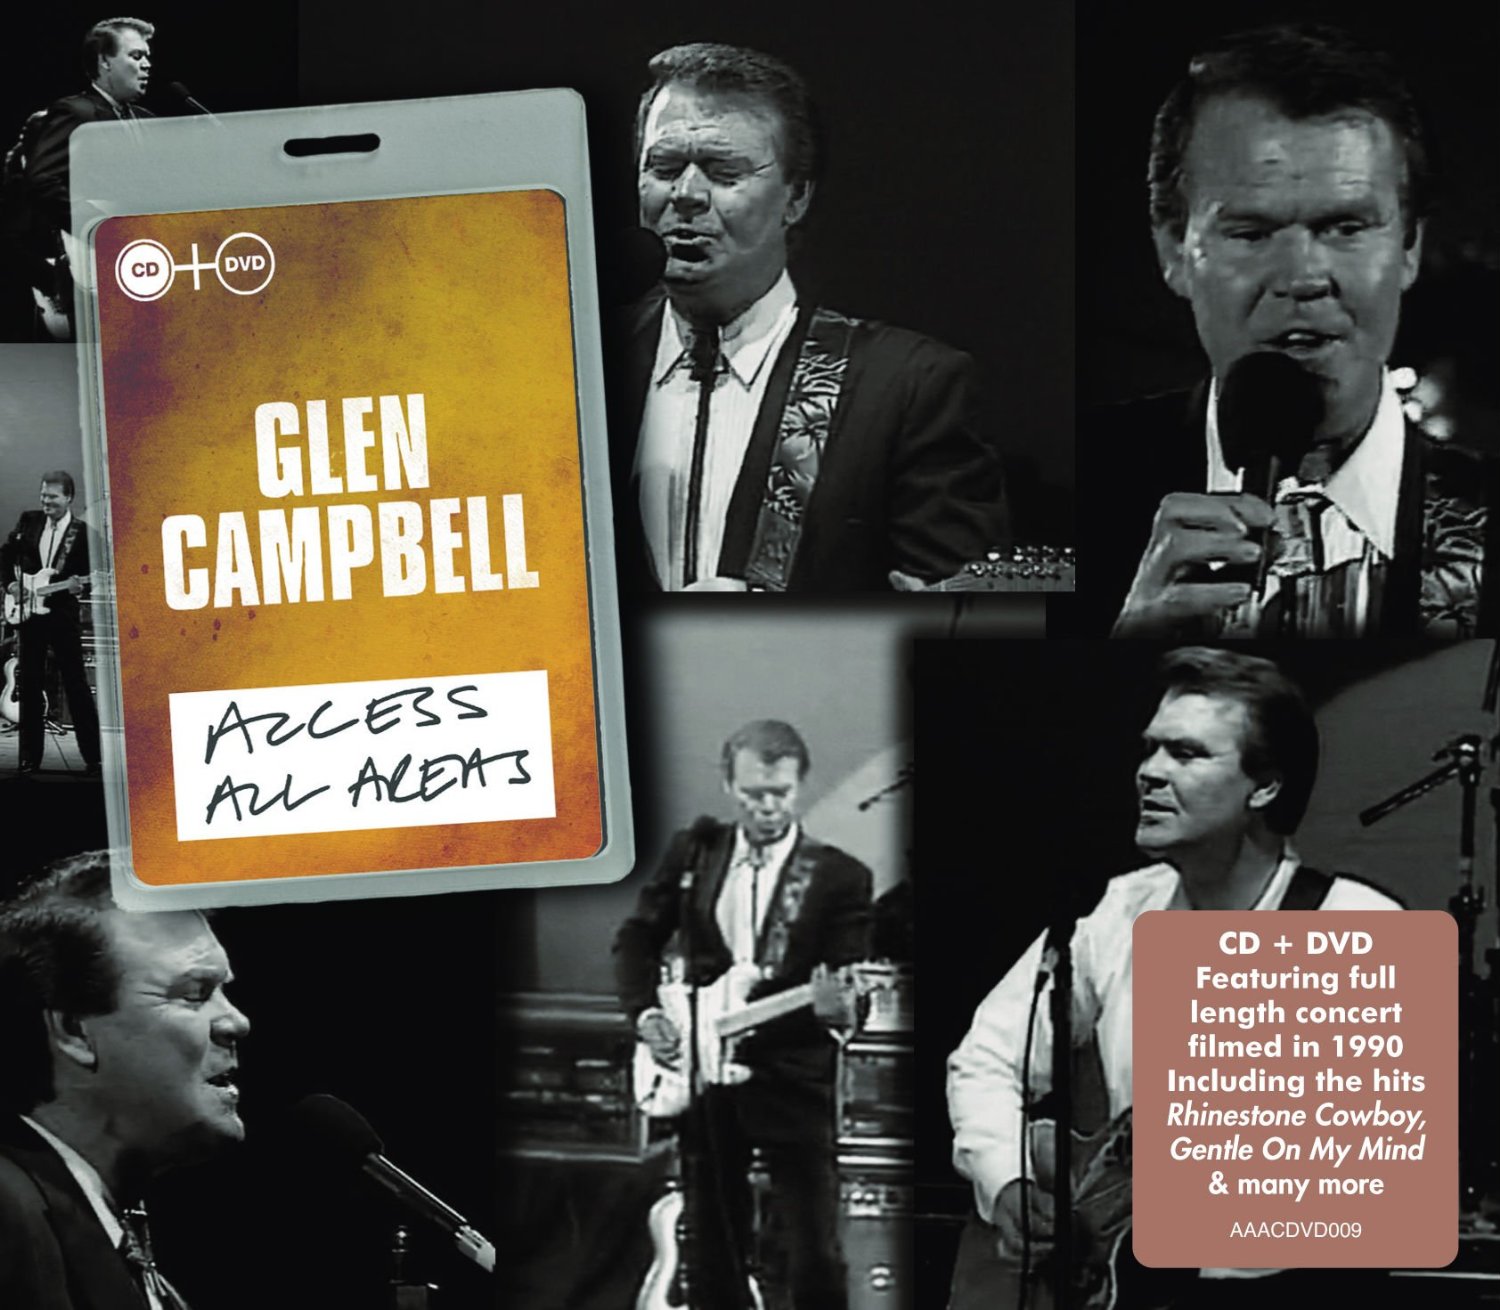 Glen Campbell - Access All Areas - CD+DVD